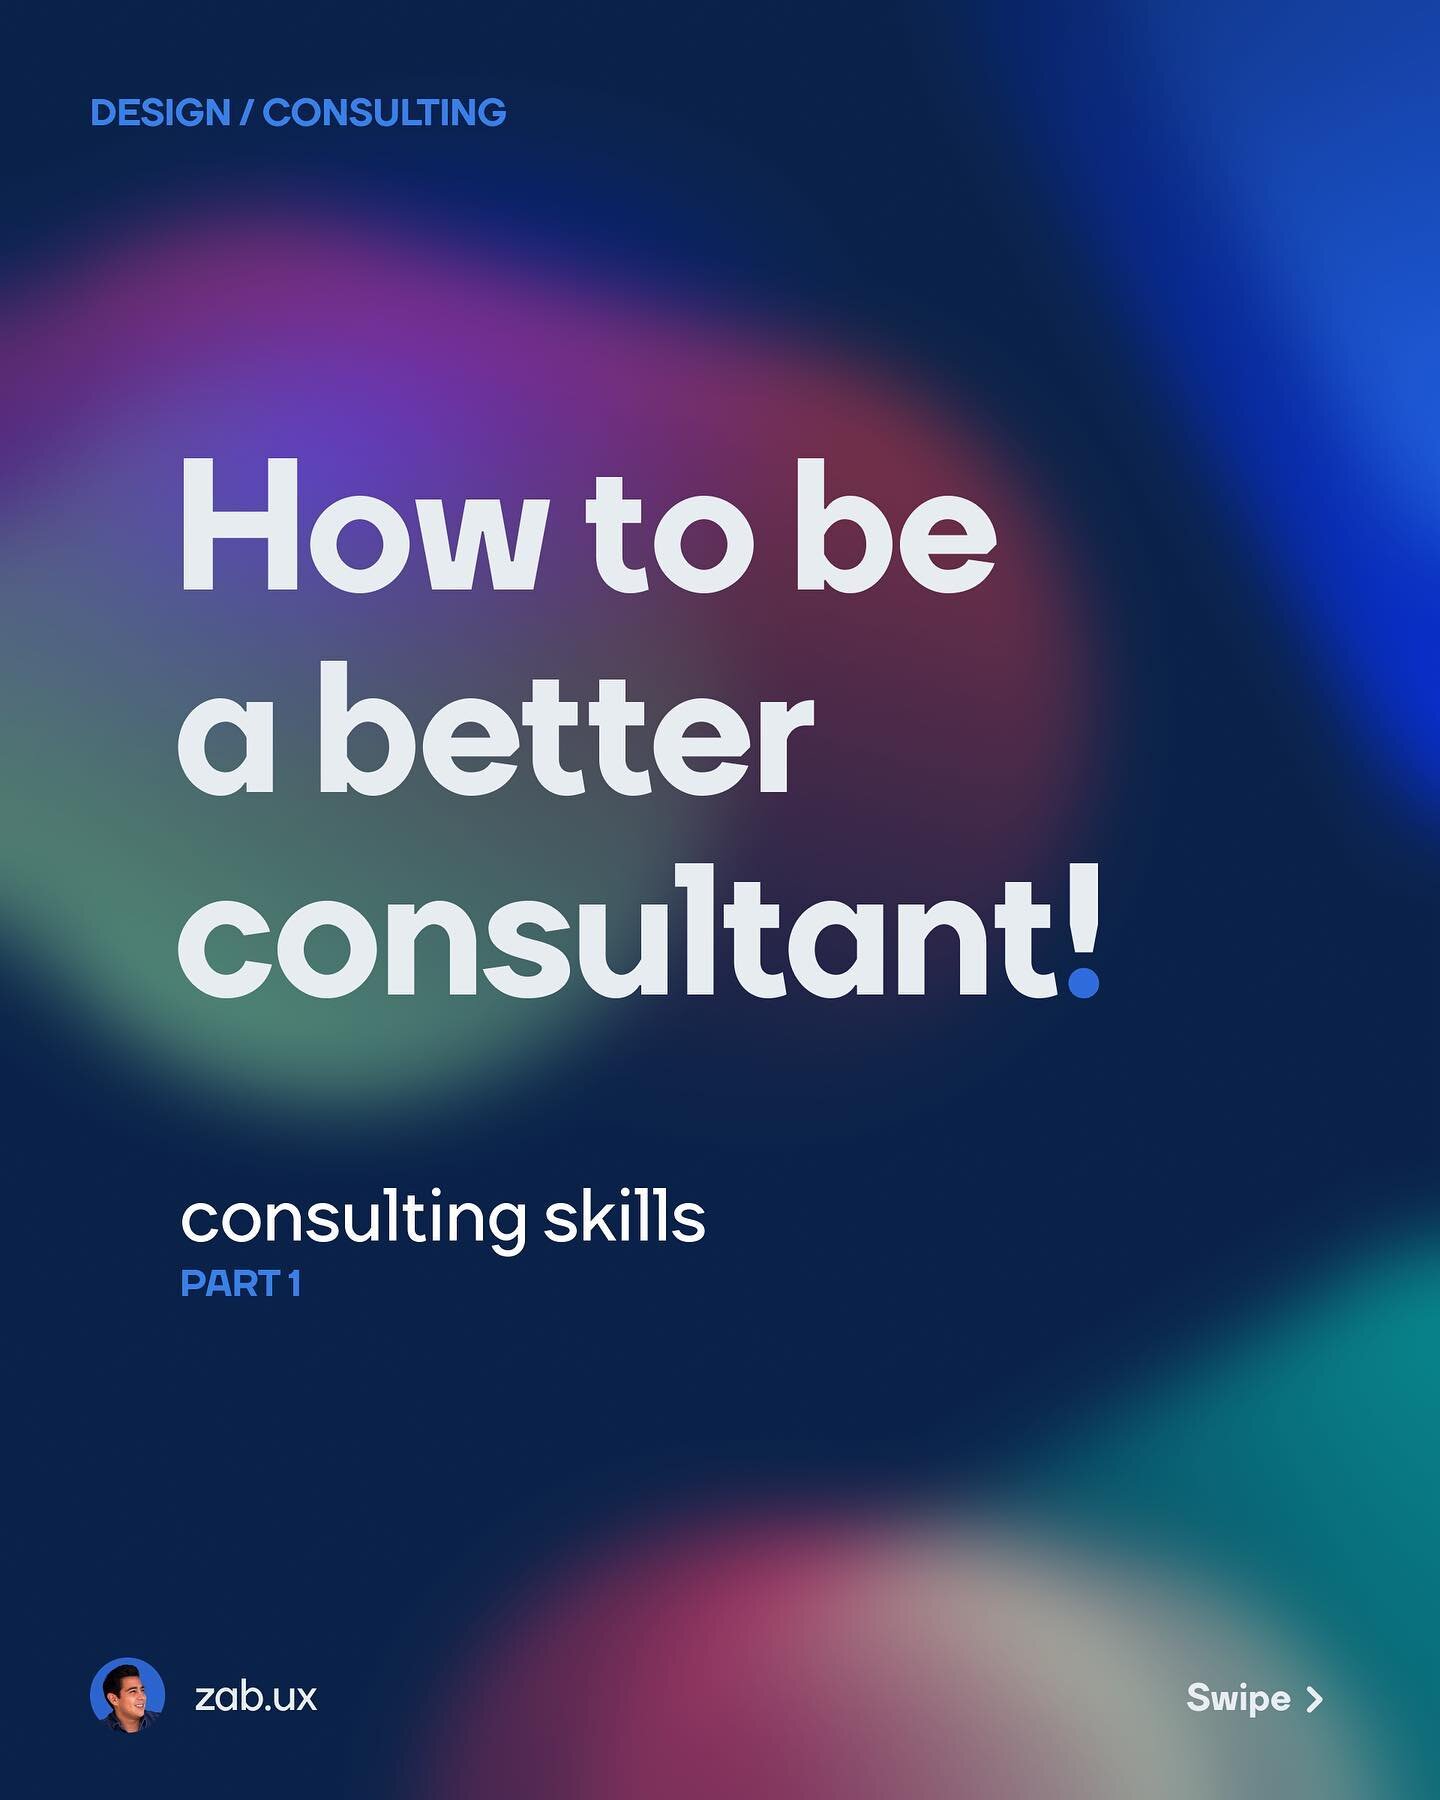 Inspired by a presentation at work. Here is part one of how to be a better consultant, tips for designers and it&rsquo;s important.
.
.
When I joined projekt202 back in 2017 I noticed my coworkers were a little different than the people I&rsquo;ve wo